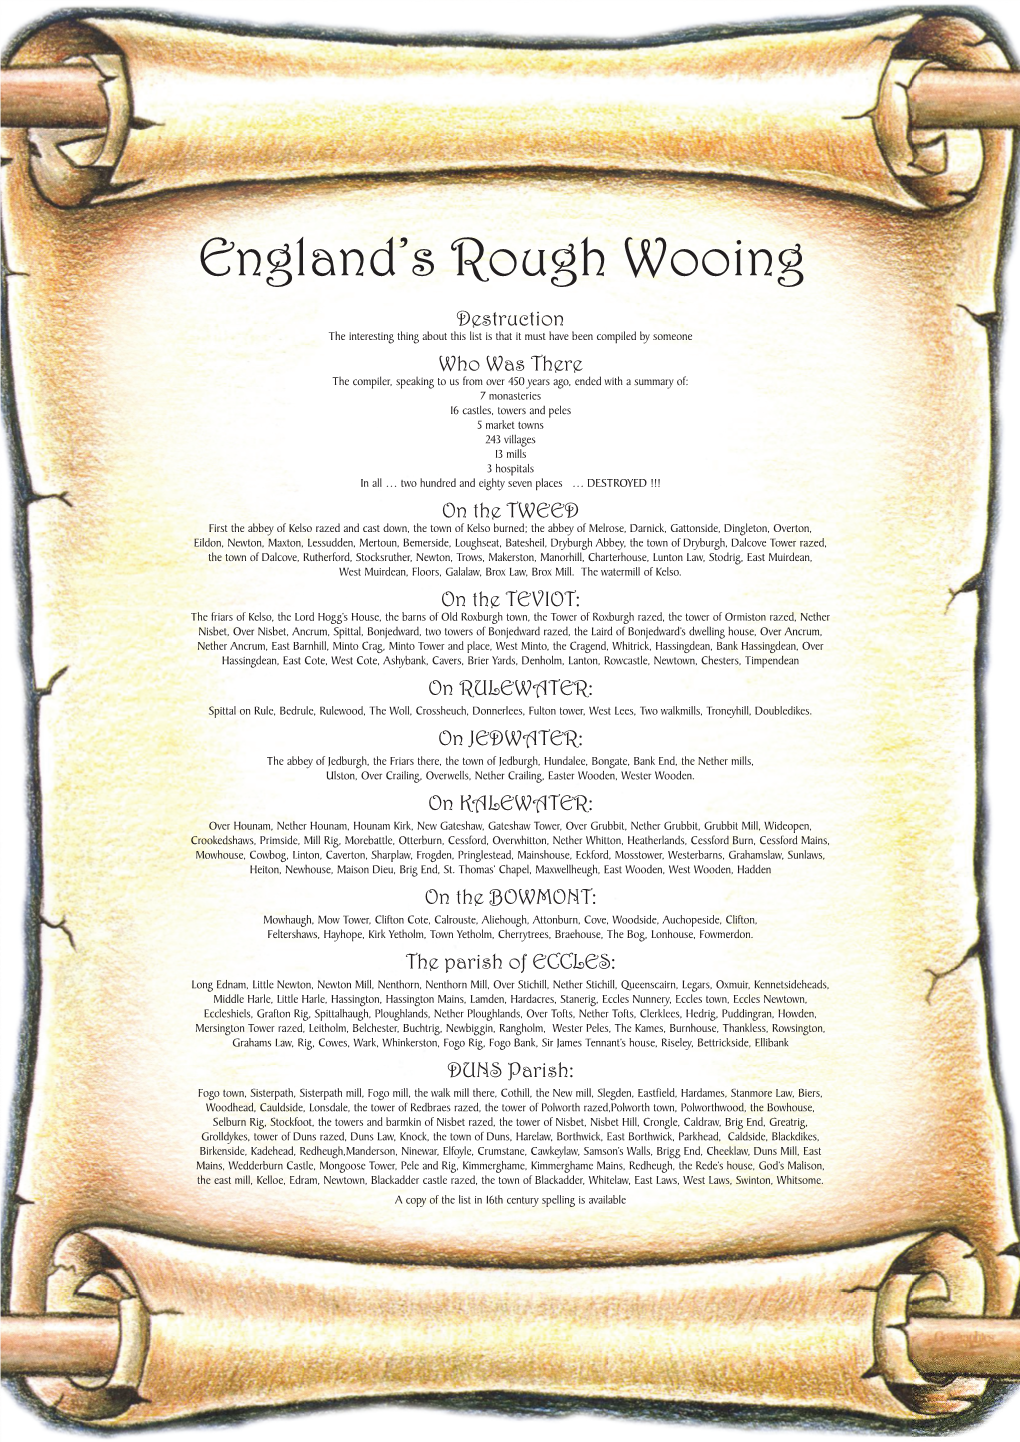 England's Rough Wooing Scroll